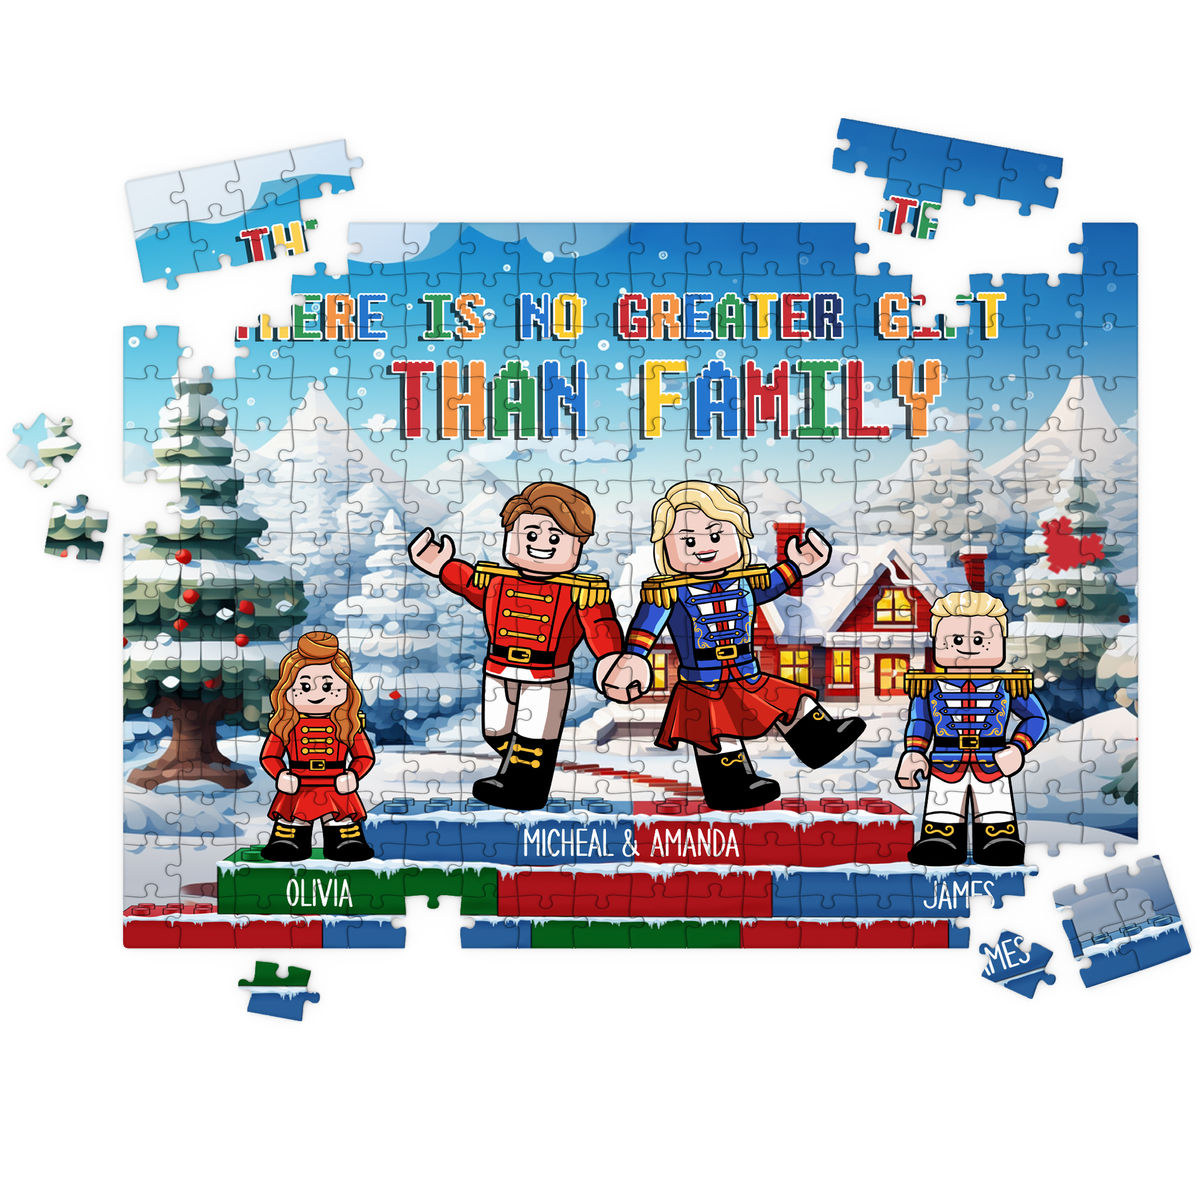 Personalized Puzzle - Personalized Jigsaw Puzzles - There is no Greater Gift than Family - Figure Family Christmas Together_2